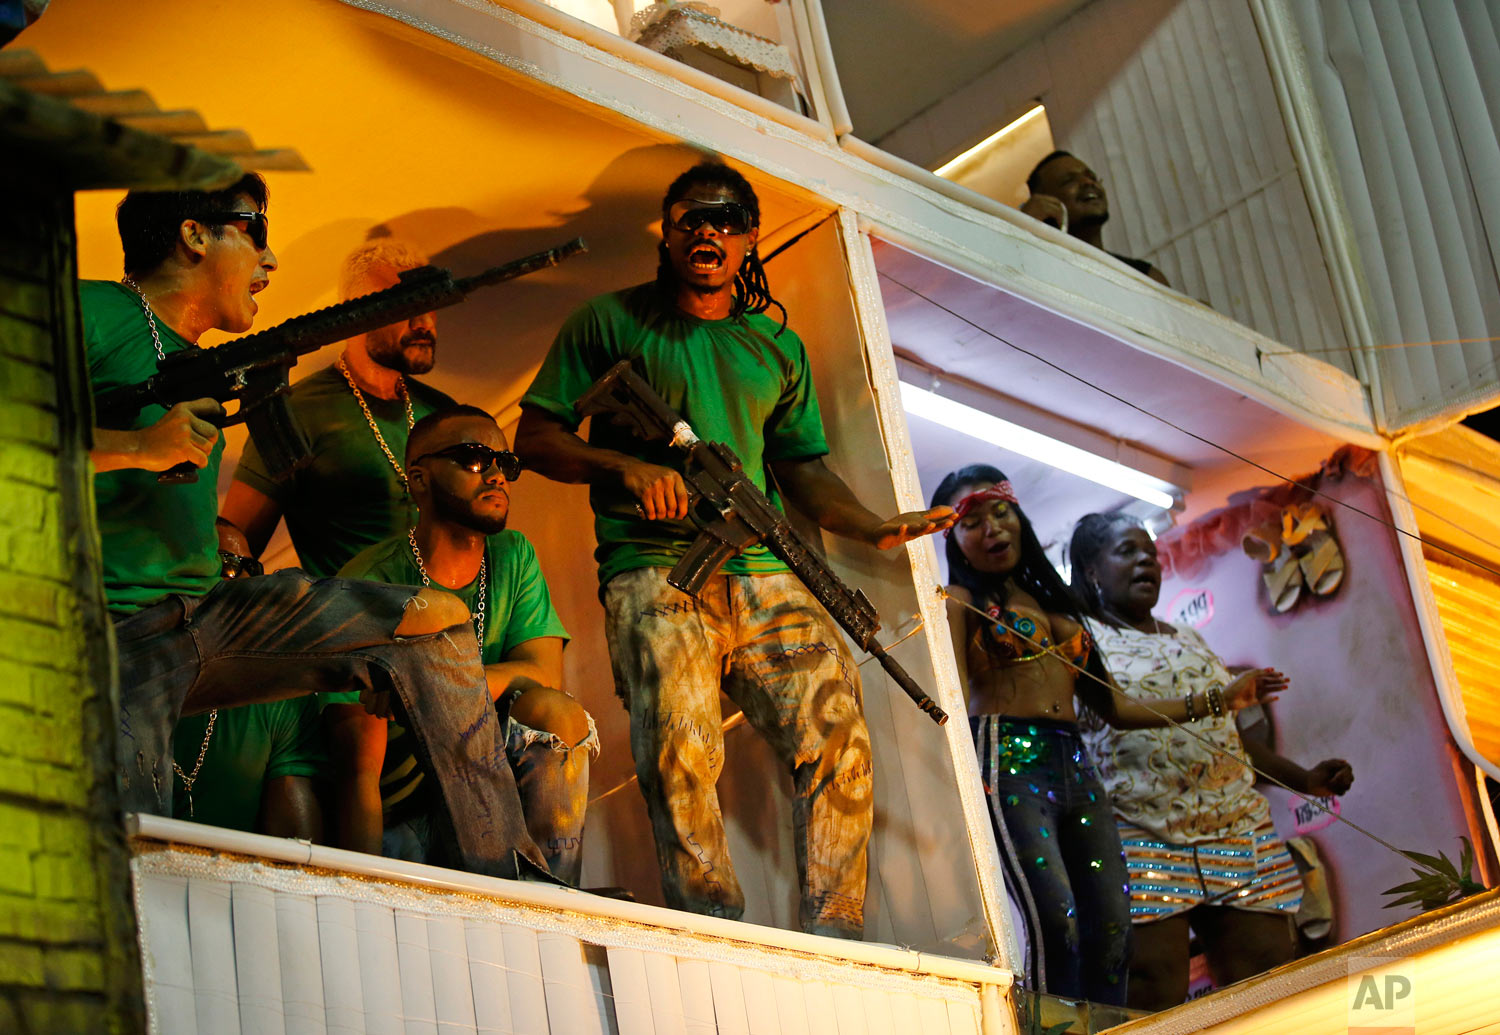  Members from the Beija Flor samba school portray drug traffickers during Carnival celebrations at the Sambadrome in Rio de Janeiro, Brazil, early Tuesday, Feb. 13, 2018. Brazil's most famous city has long struggled with violence, particularly in the hundreds of slums controlled by drug traffickers, with criminal assaults and increasing shootouts between drug traffickers and police. (AP Photo/Silvia Izquierdo) 